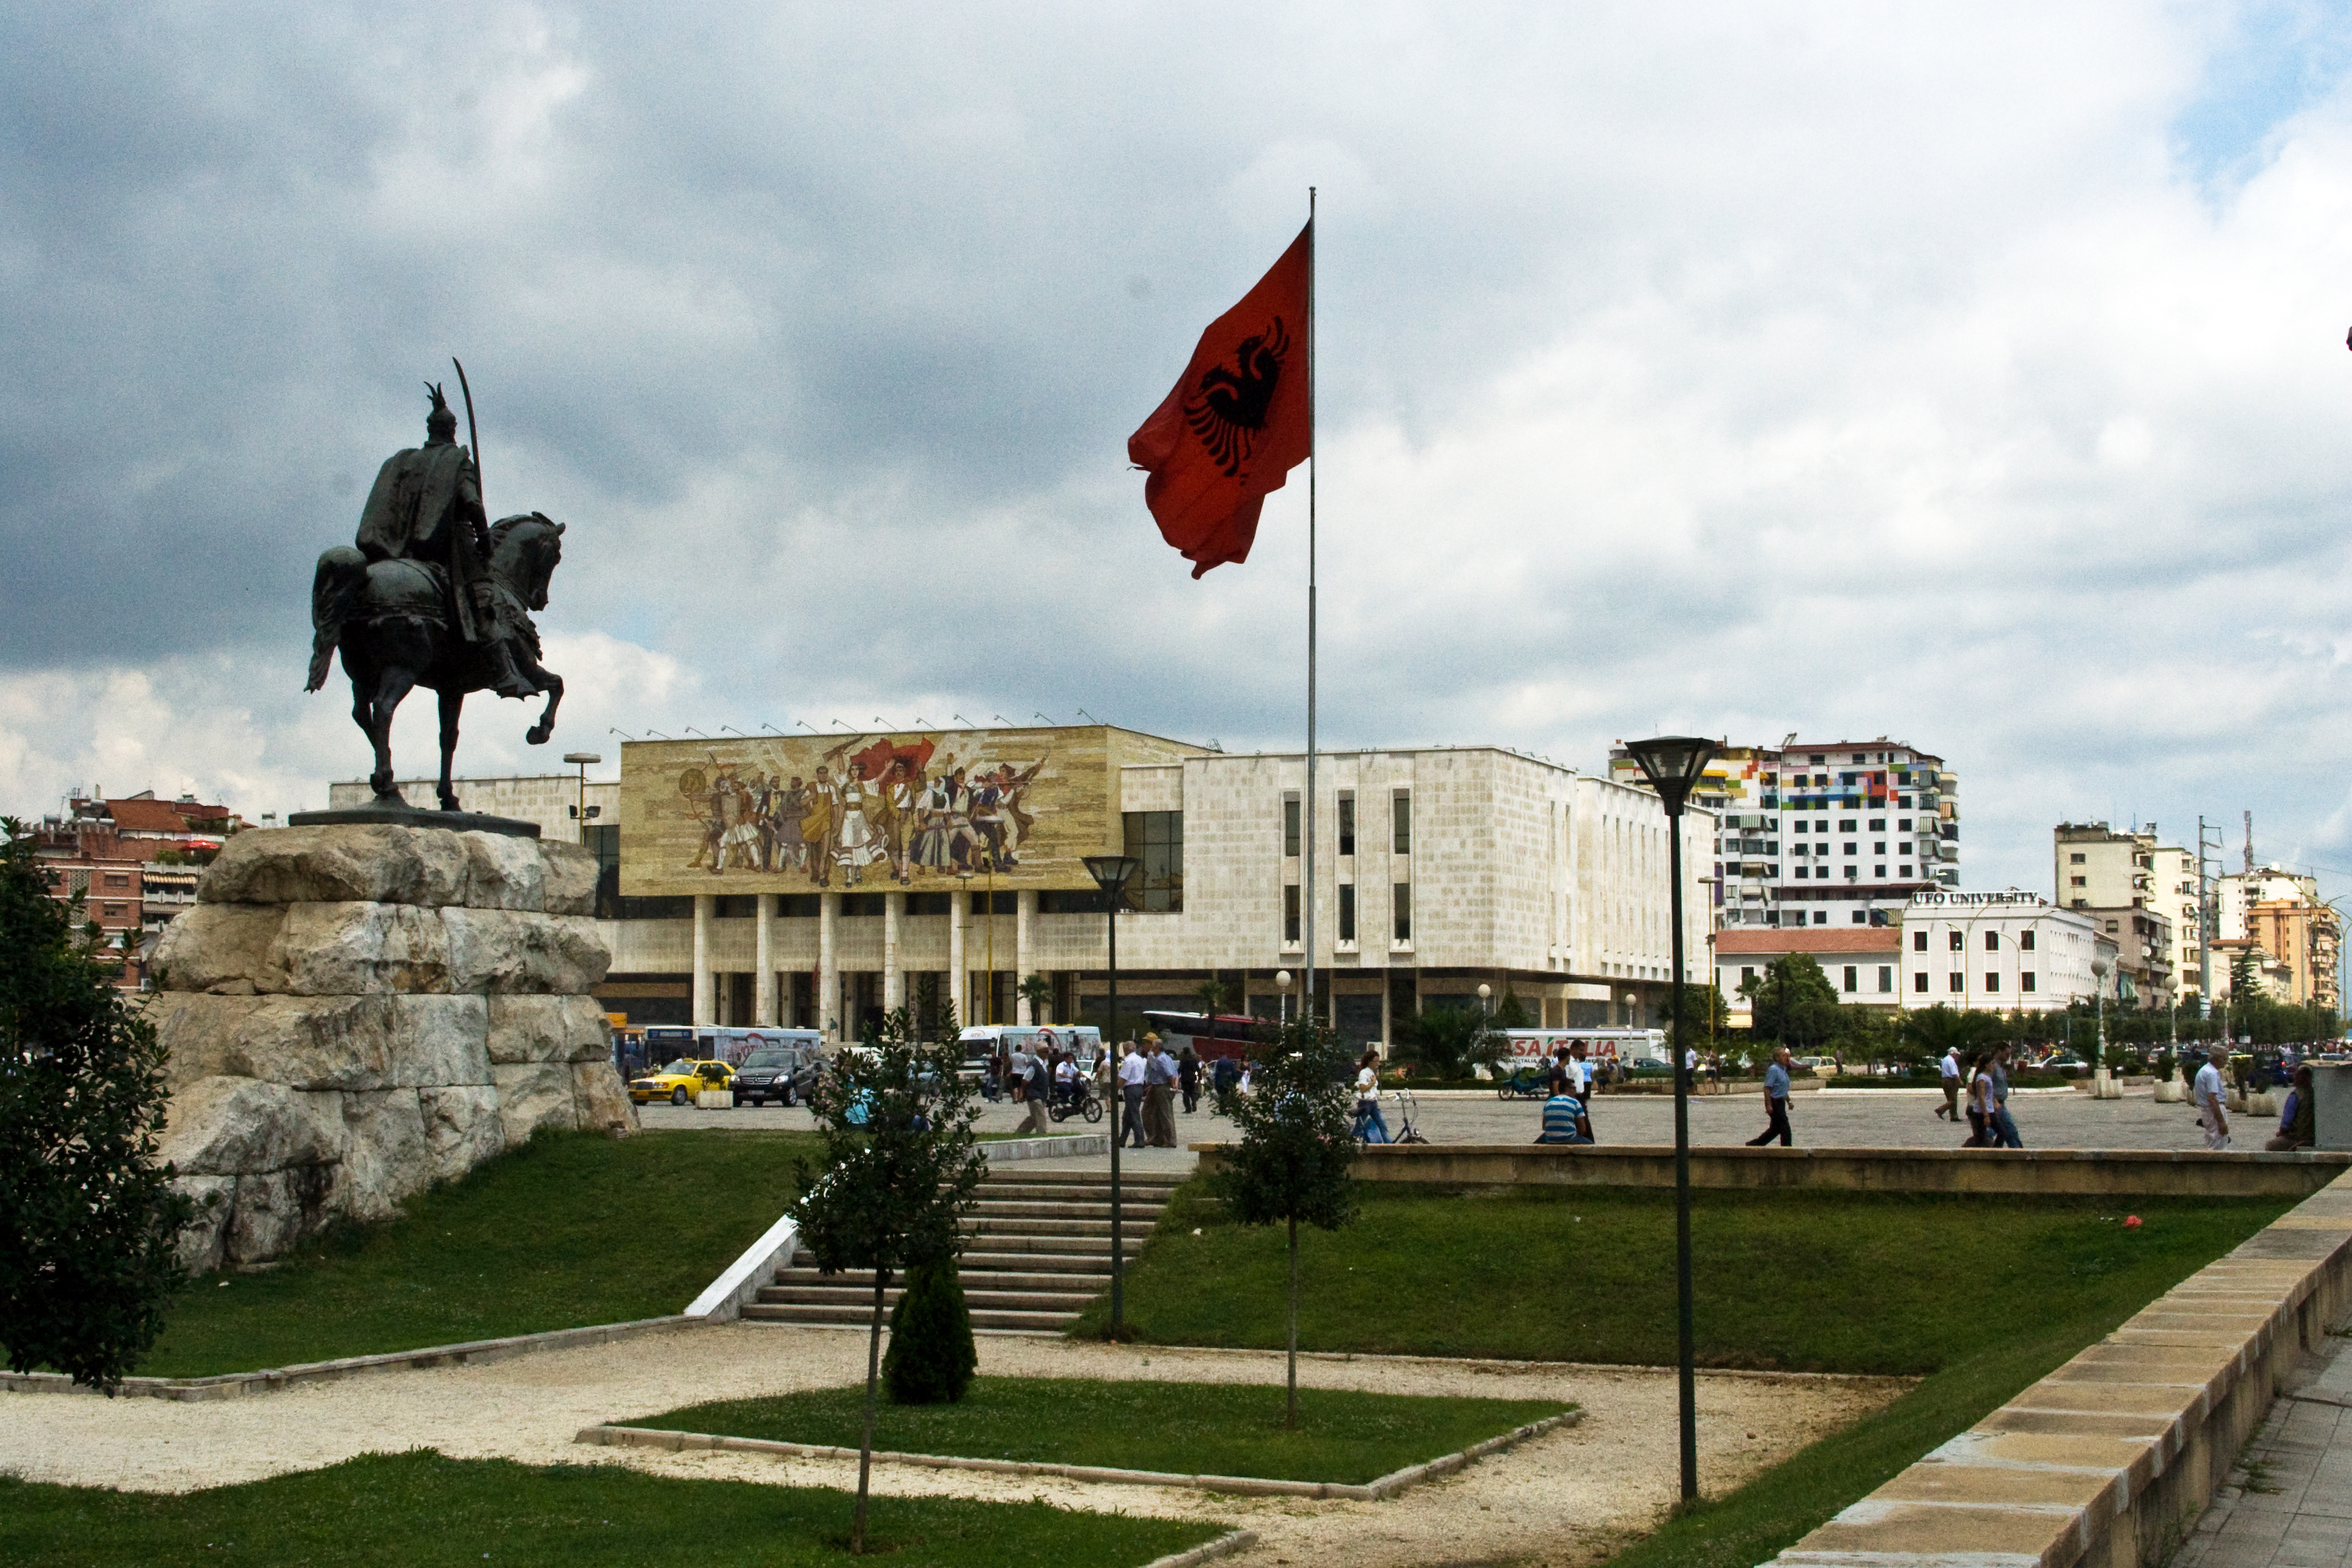 The Skanderbegplatz with a sculpture of the national hero Skanderbeg and the Palace of Culture in the Albanian capital Tirana